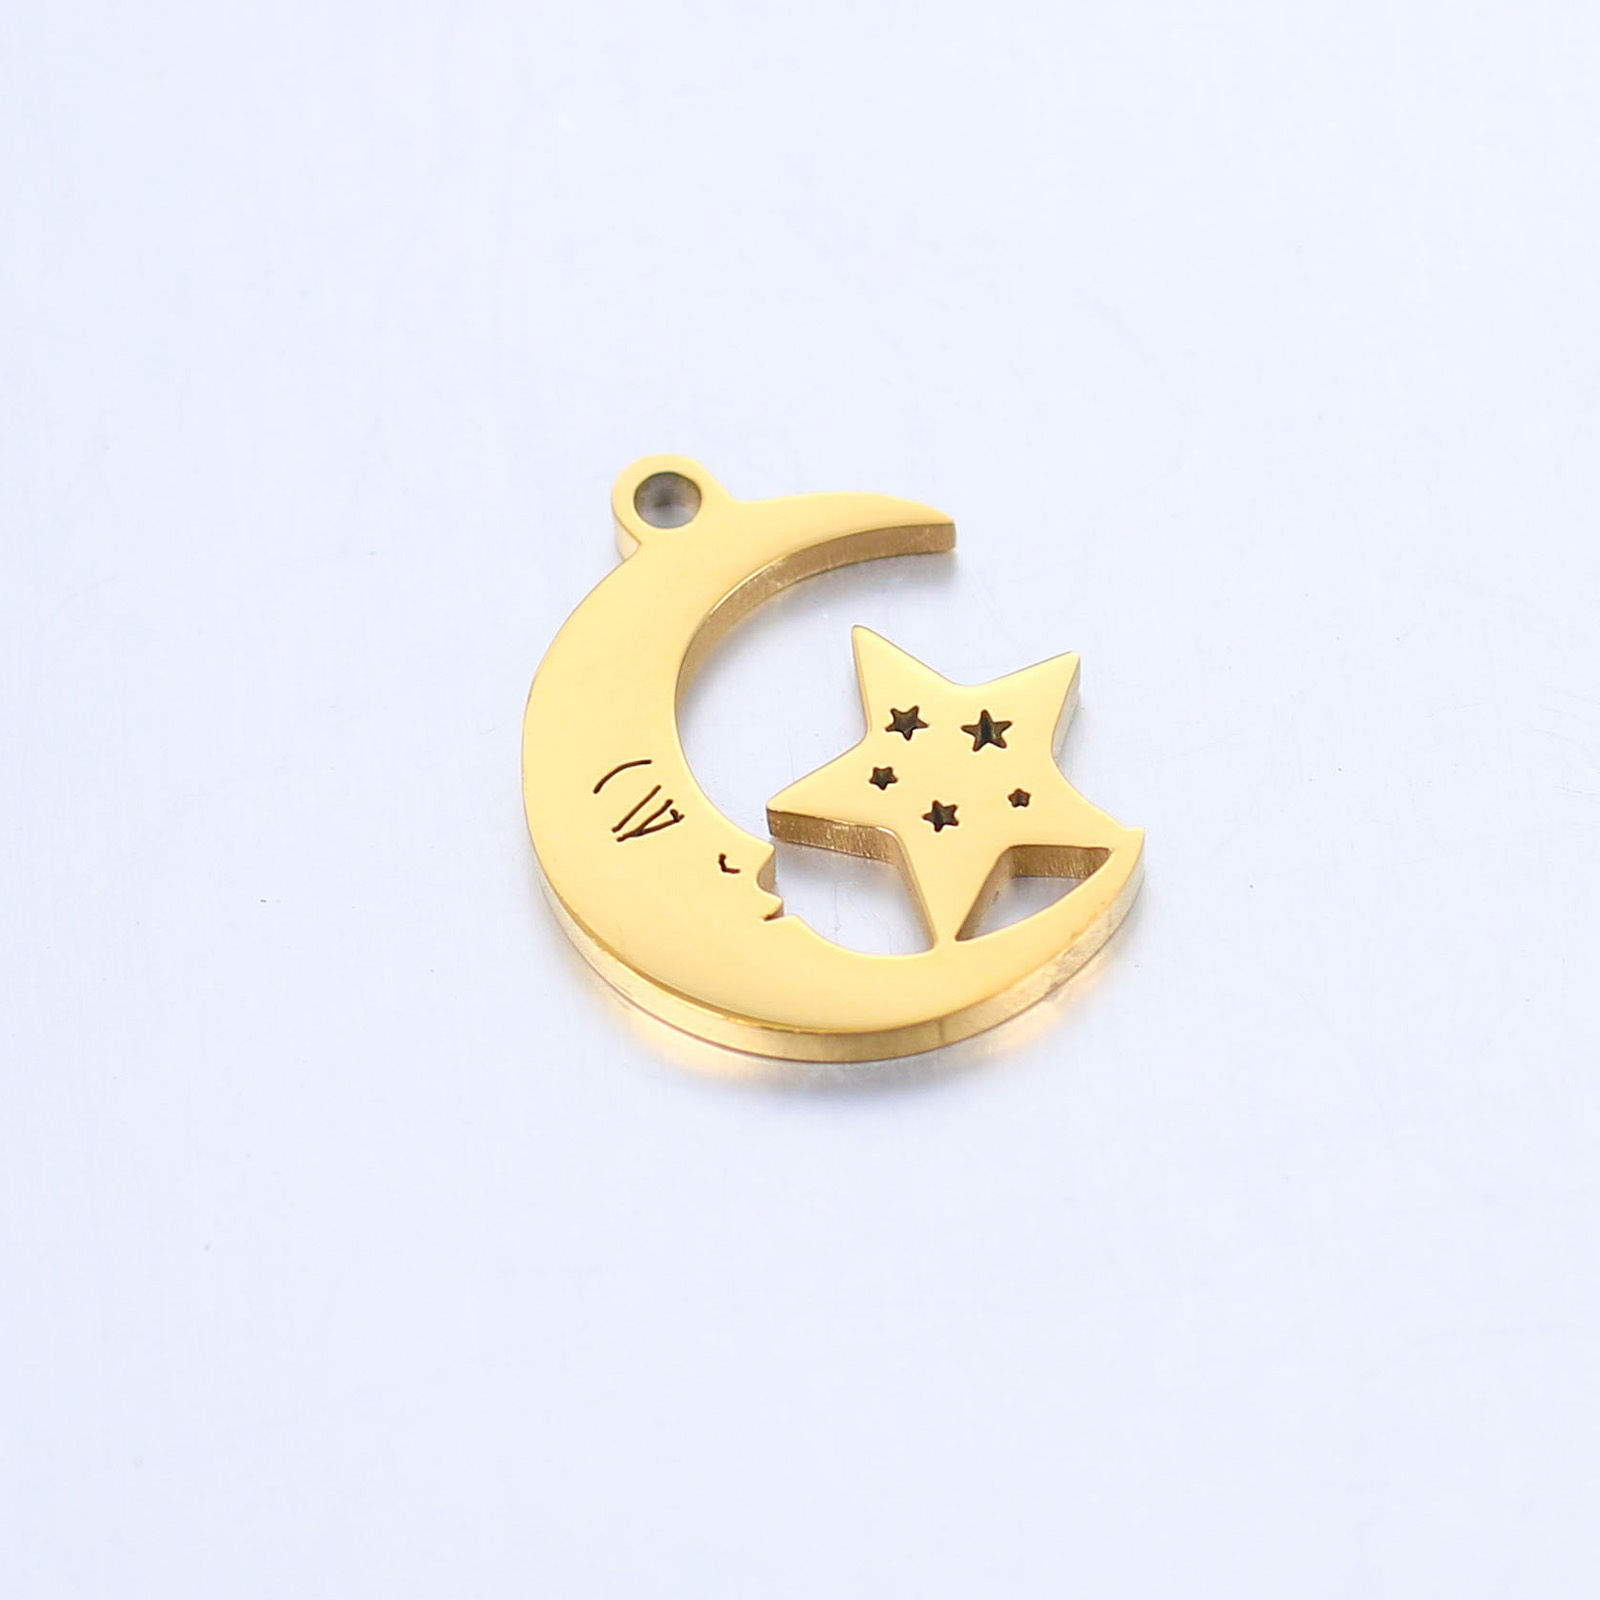 Picture of 304 Stainless Steel Galaxy Charms Gold Plated Half Moon Star 17mm x 14mm, 1 Piece